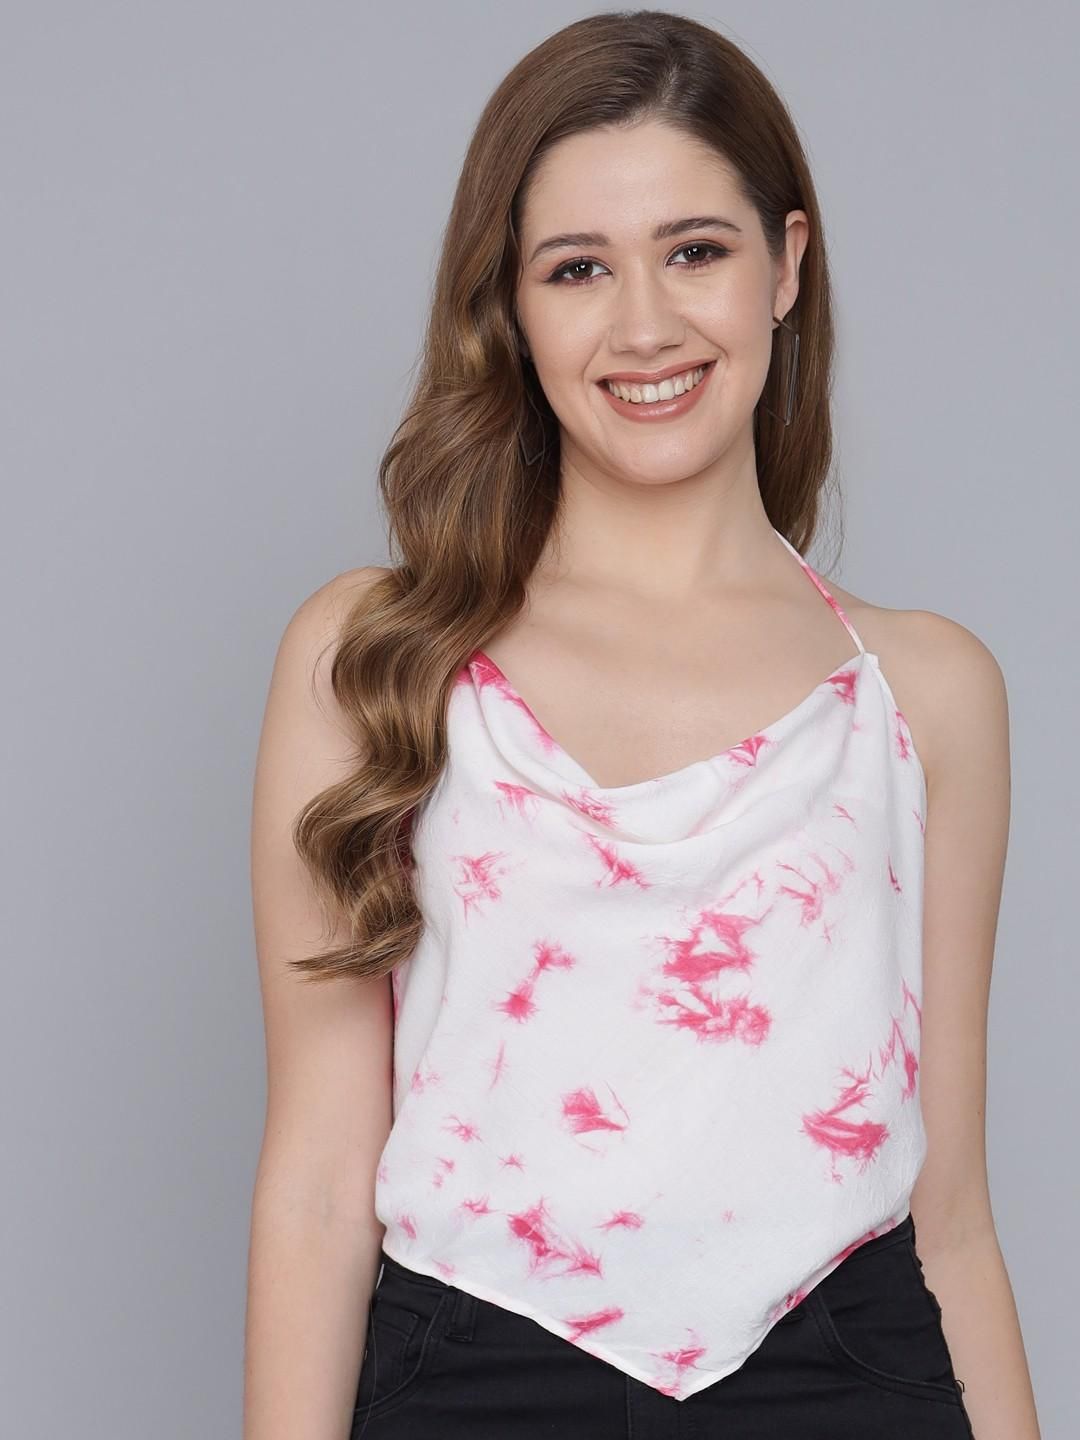 Stay Stylish: Casual Sleeveless Tie & Dye Women Pink Top for Effortless Charm